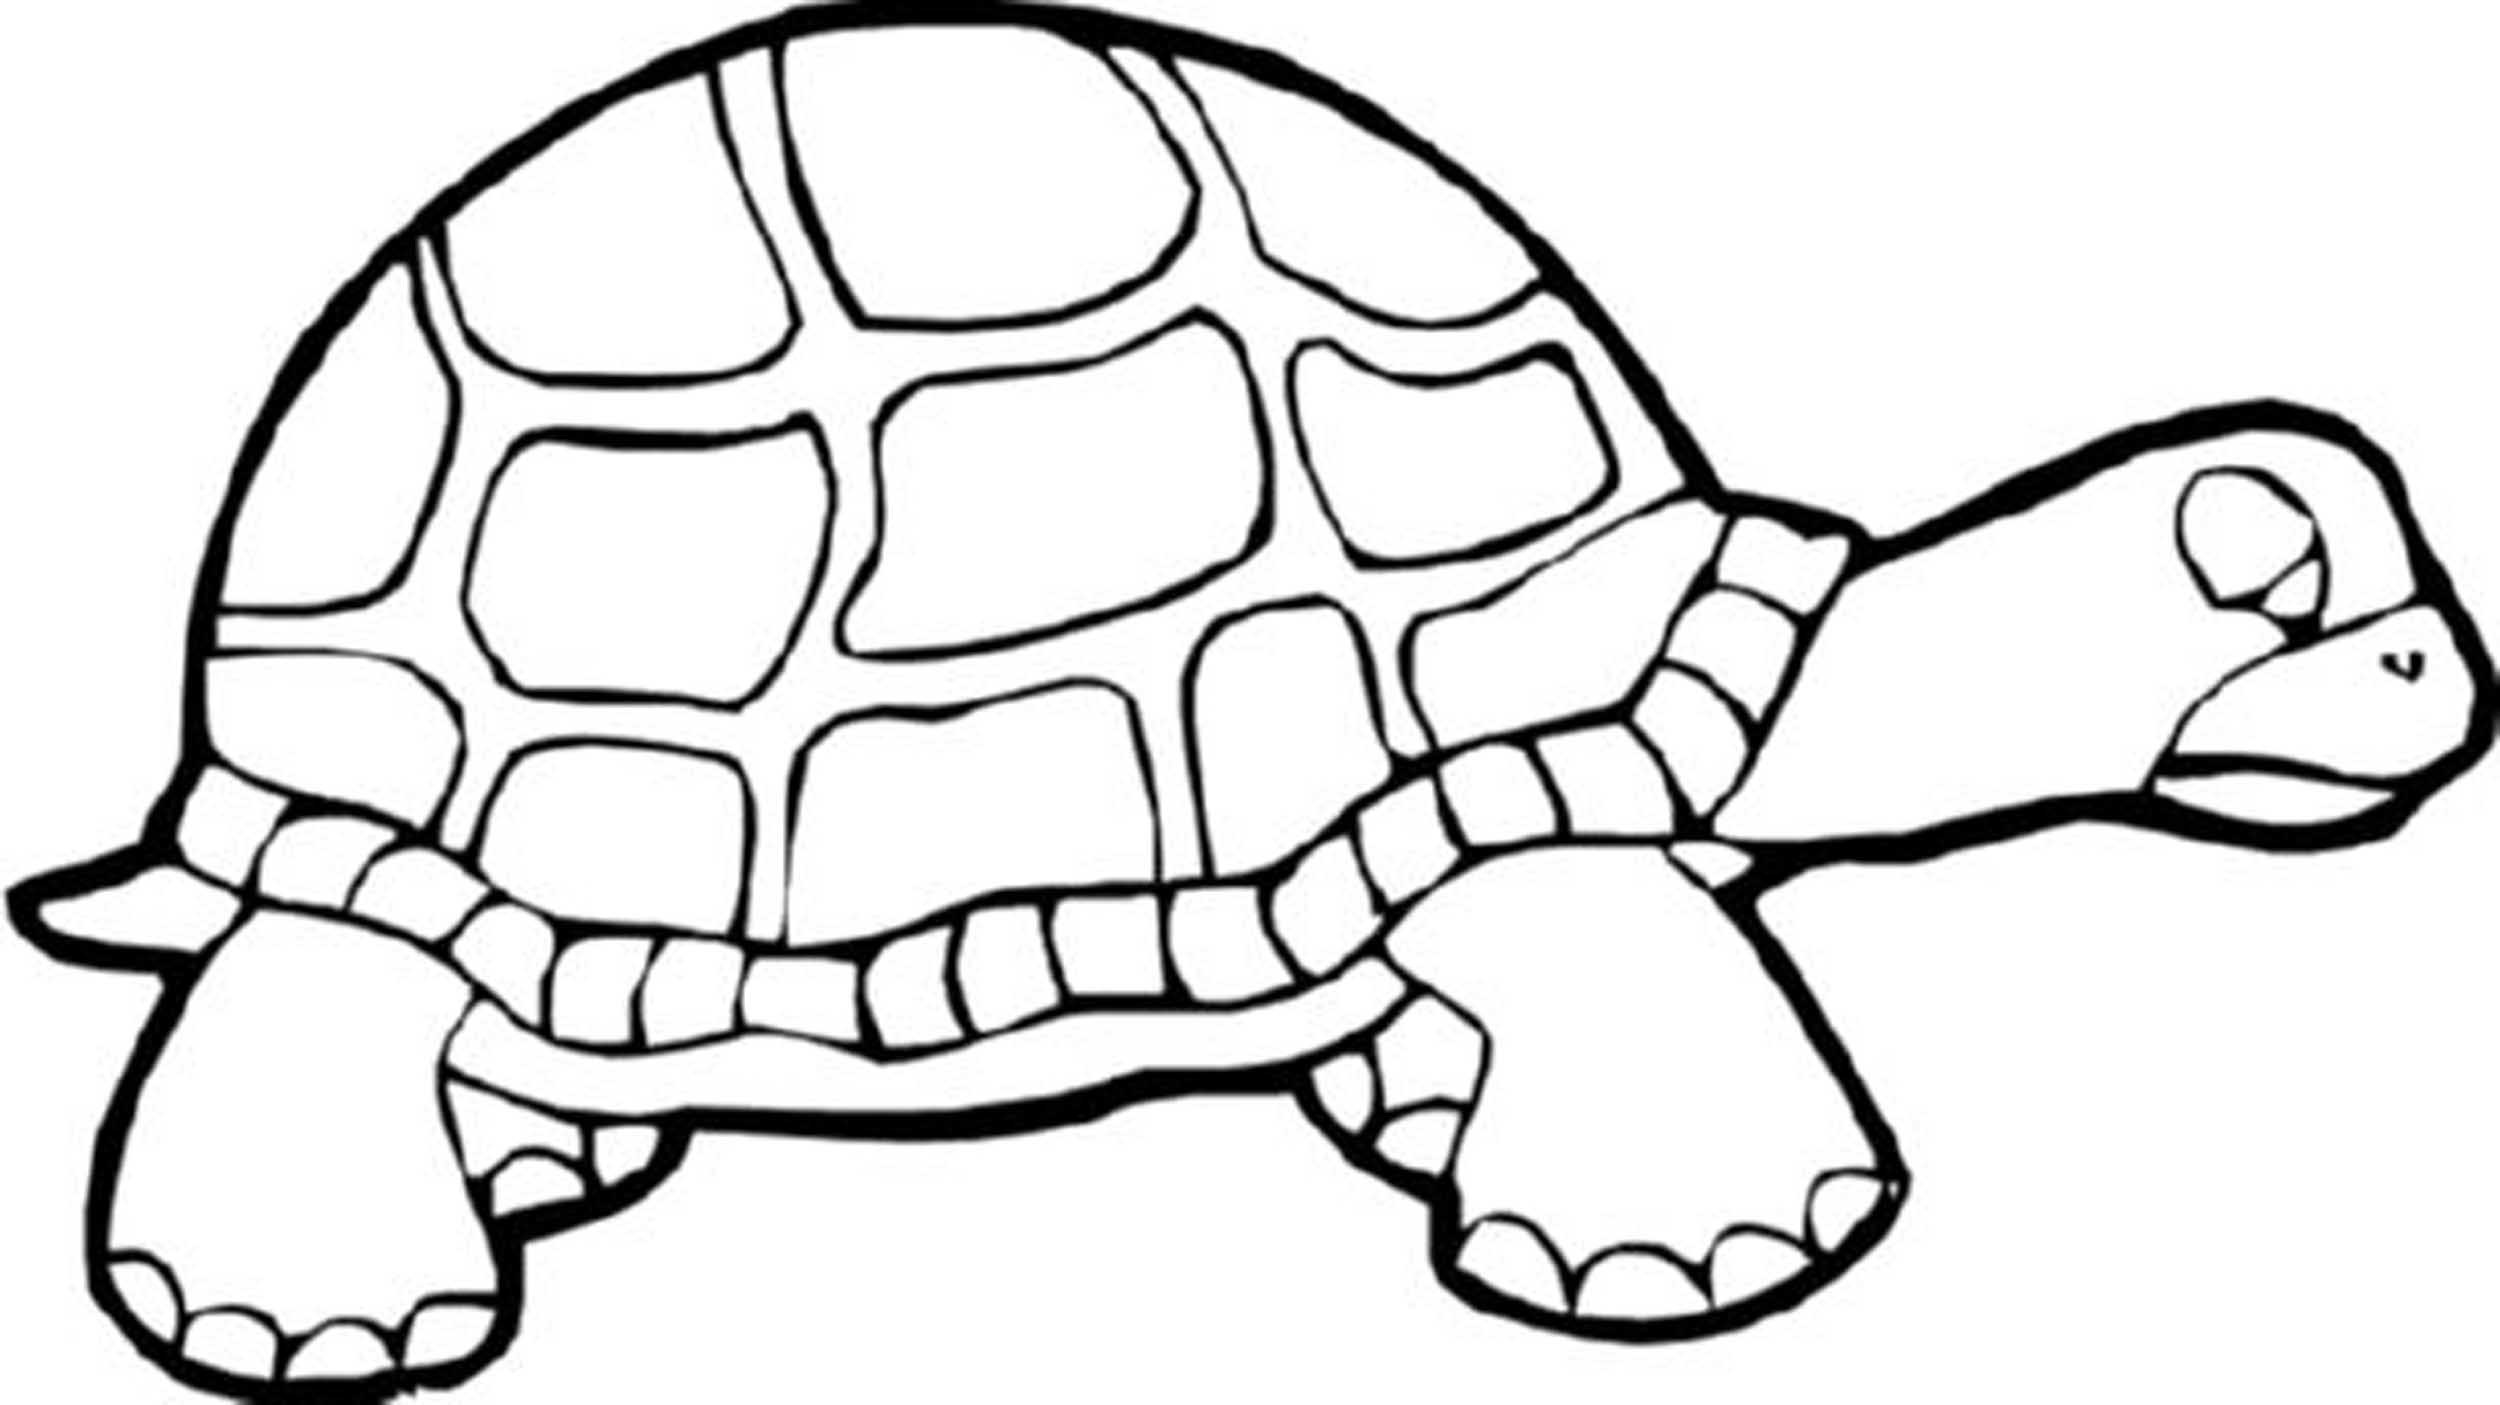 Turtle Coloring Book
 Print & Download Turtle Coloring Pages as the